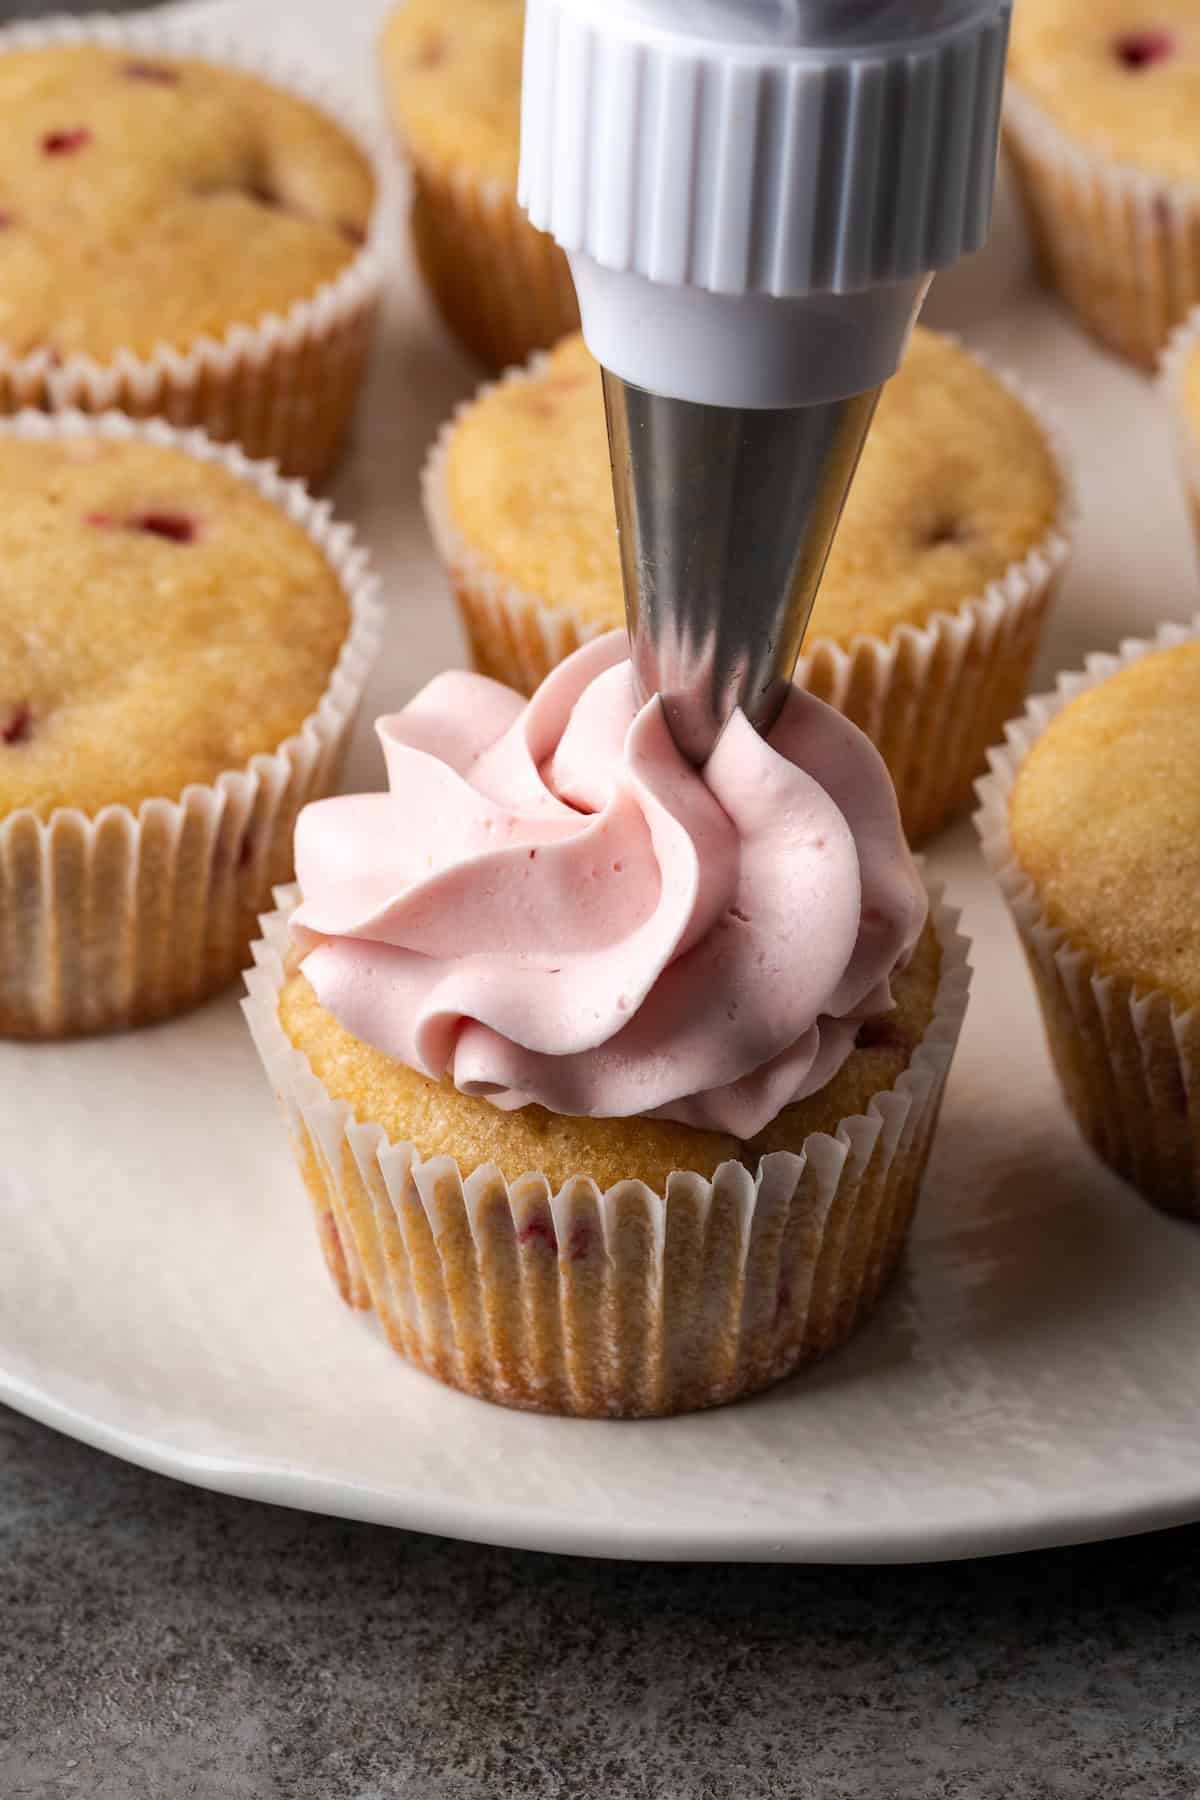 A piping tip piping a swirl of strawberry frosting onto a strawberry cupcake on a plate, with unfrosted cupcakes in the background.